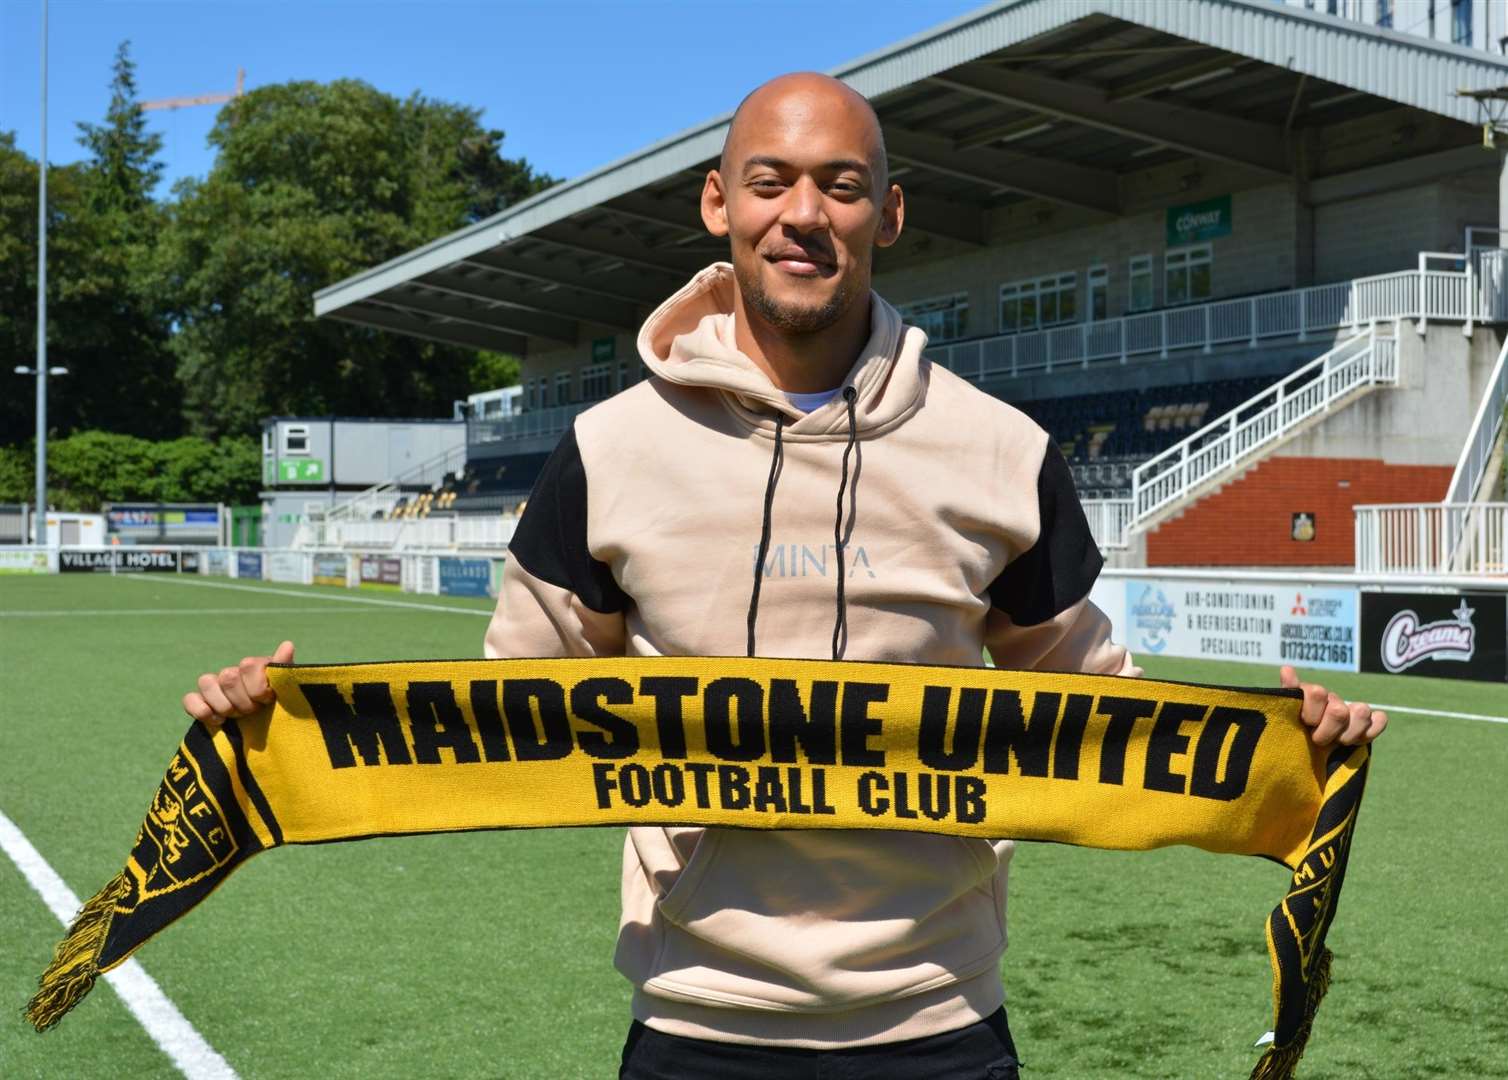 Alex Finney has joined Maidstone